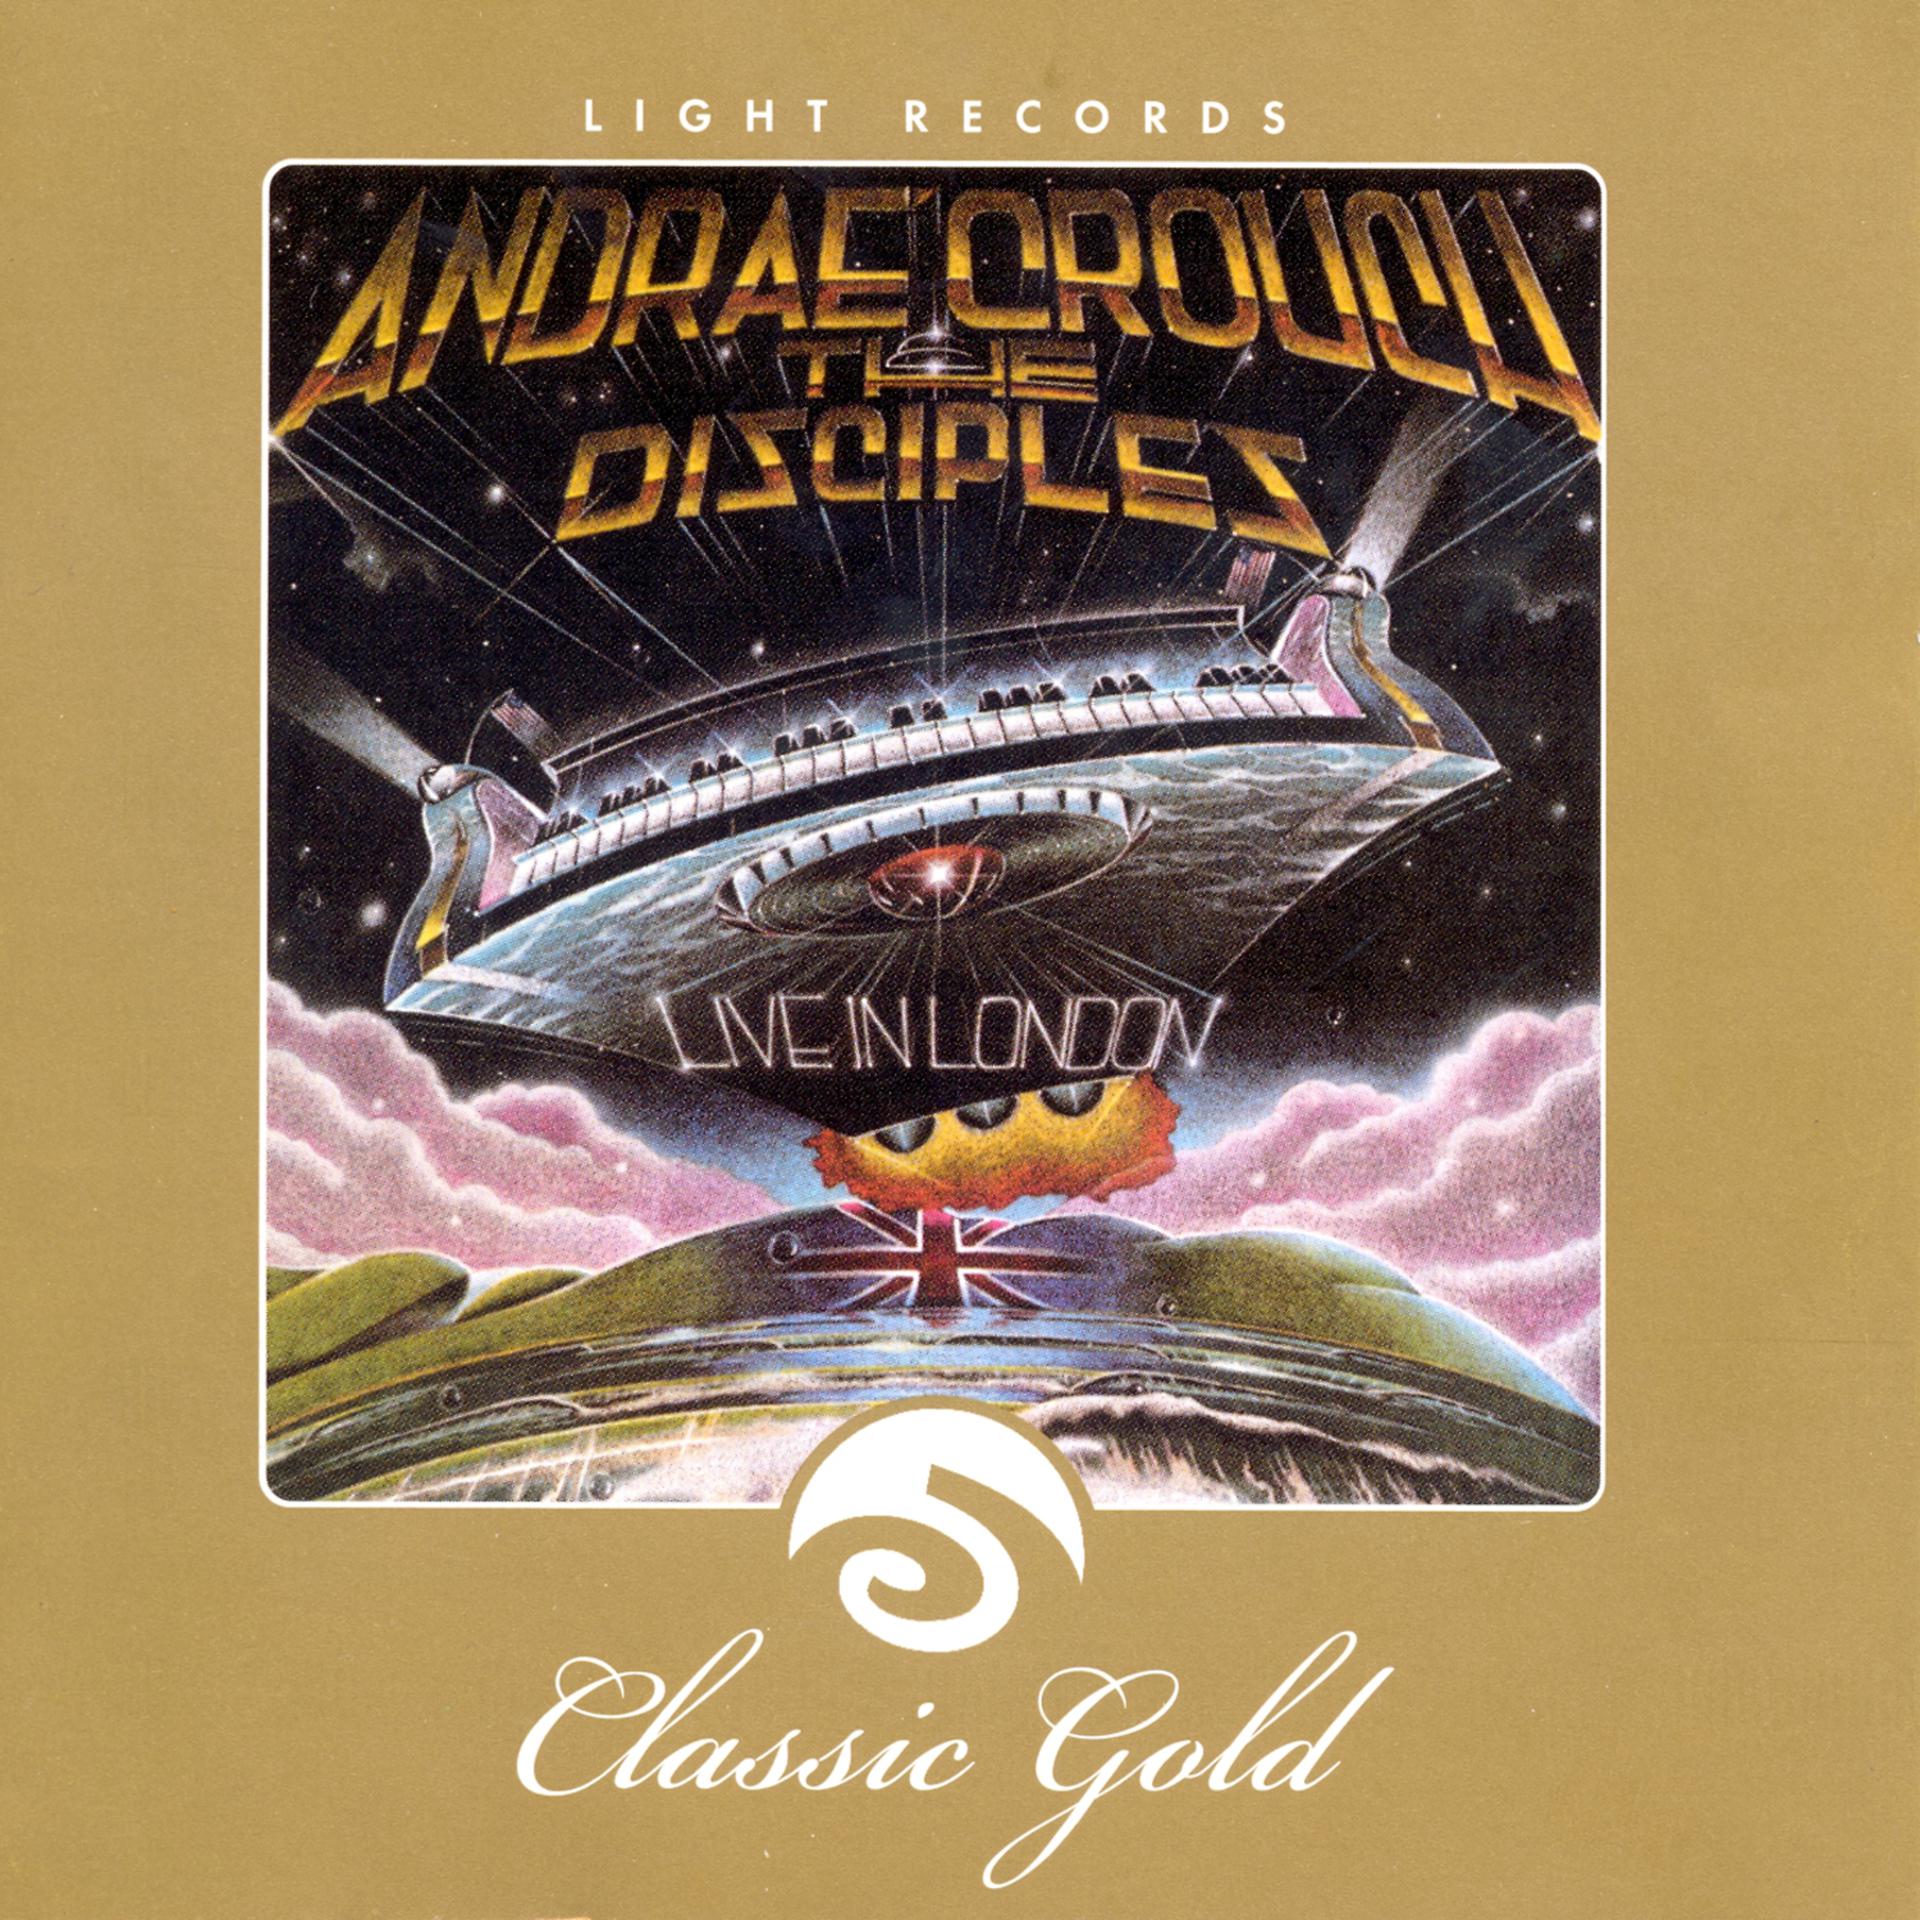 Постер альбома Classic Gold: Live In London: Andrae Crouch & The Disciples